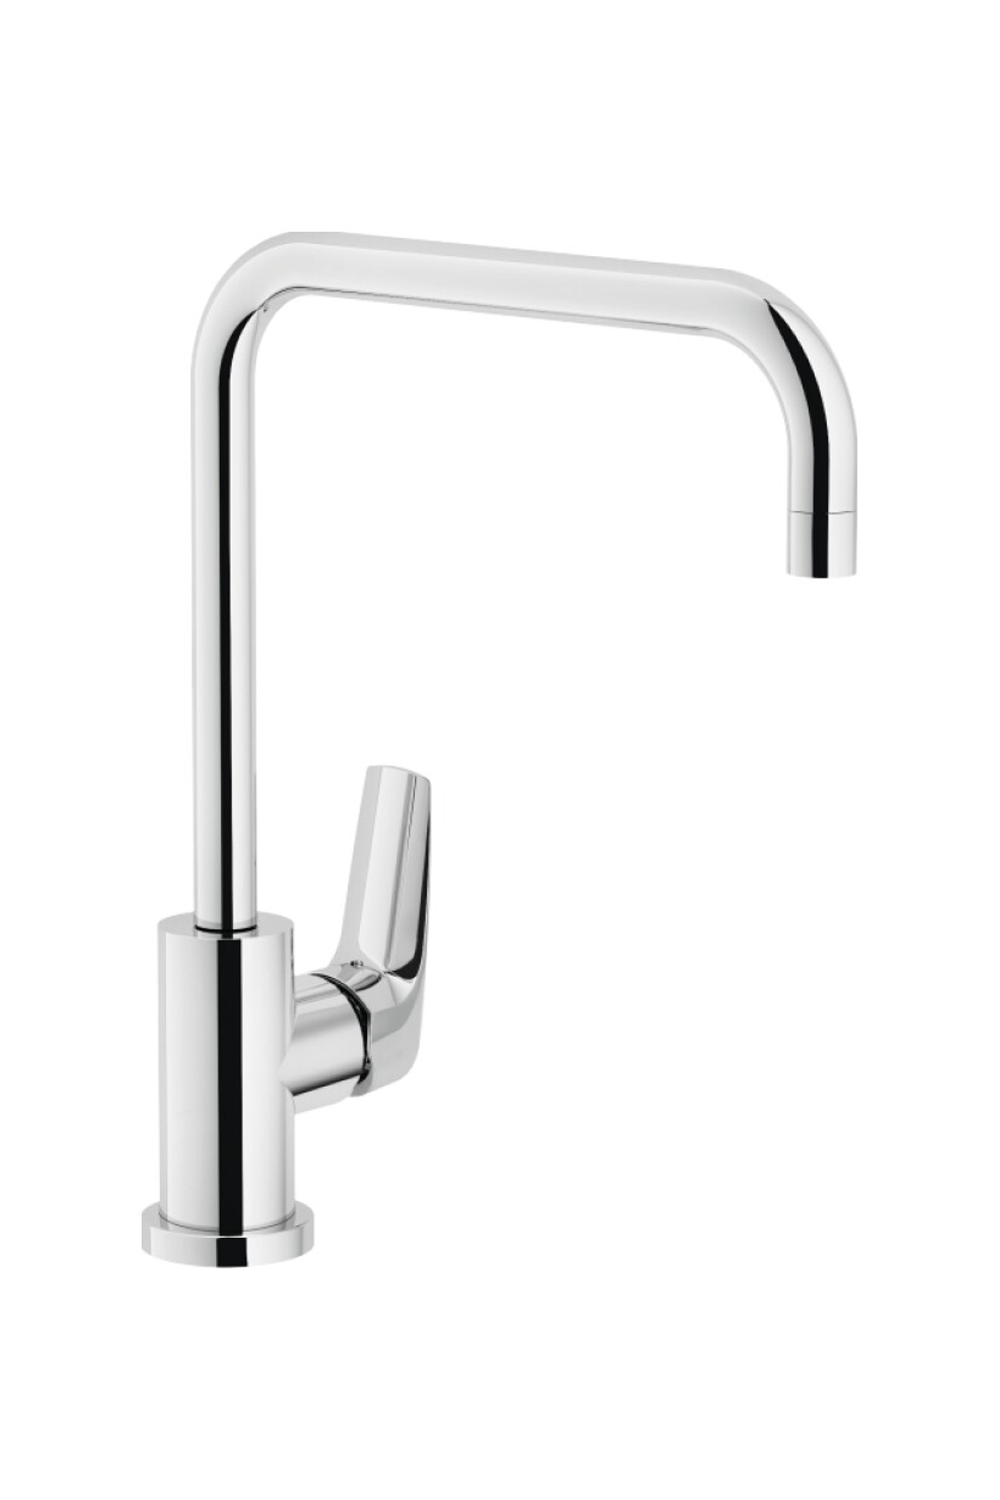 NOBILI NOBI Single Lever Kitchen Sink Mixer ME100134CR | Made in Italy |